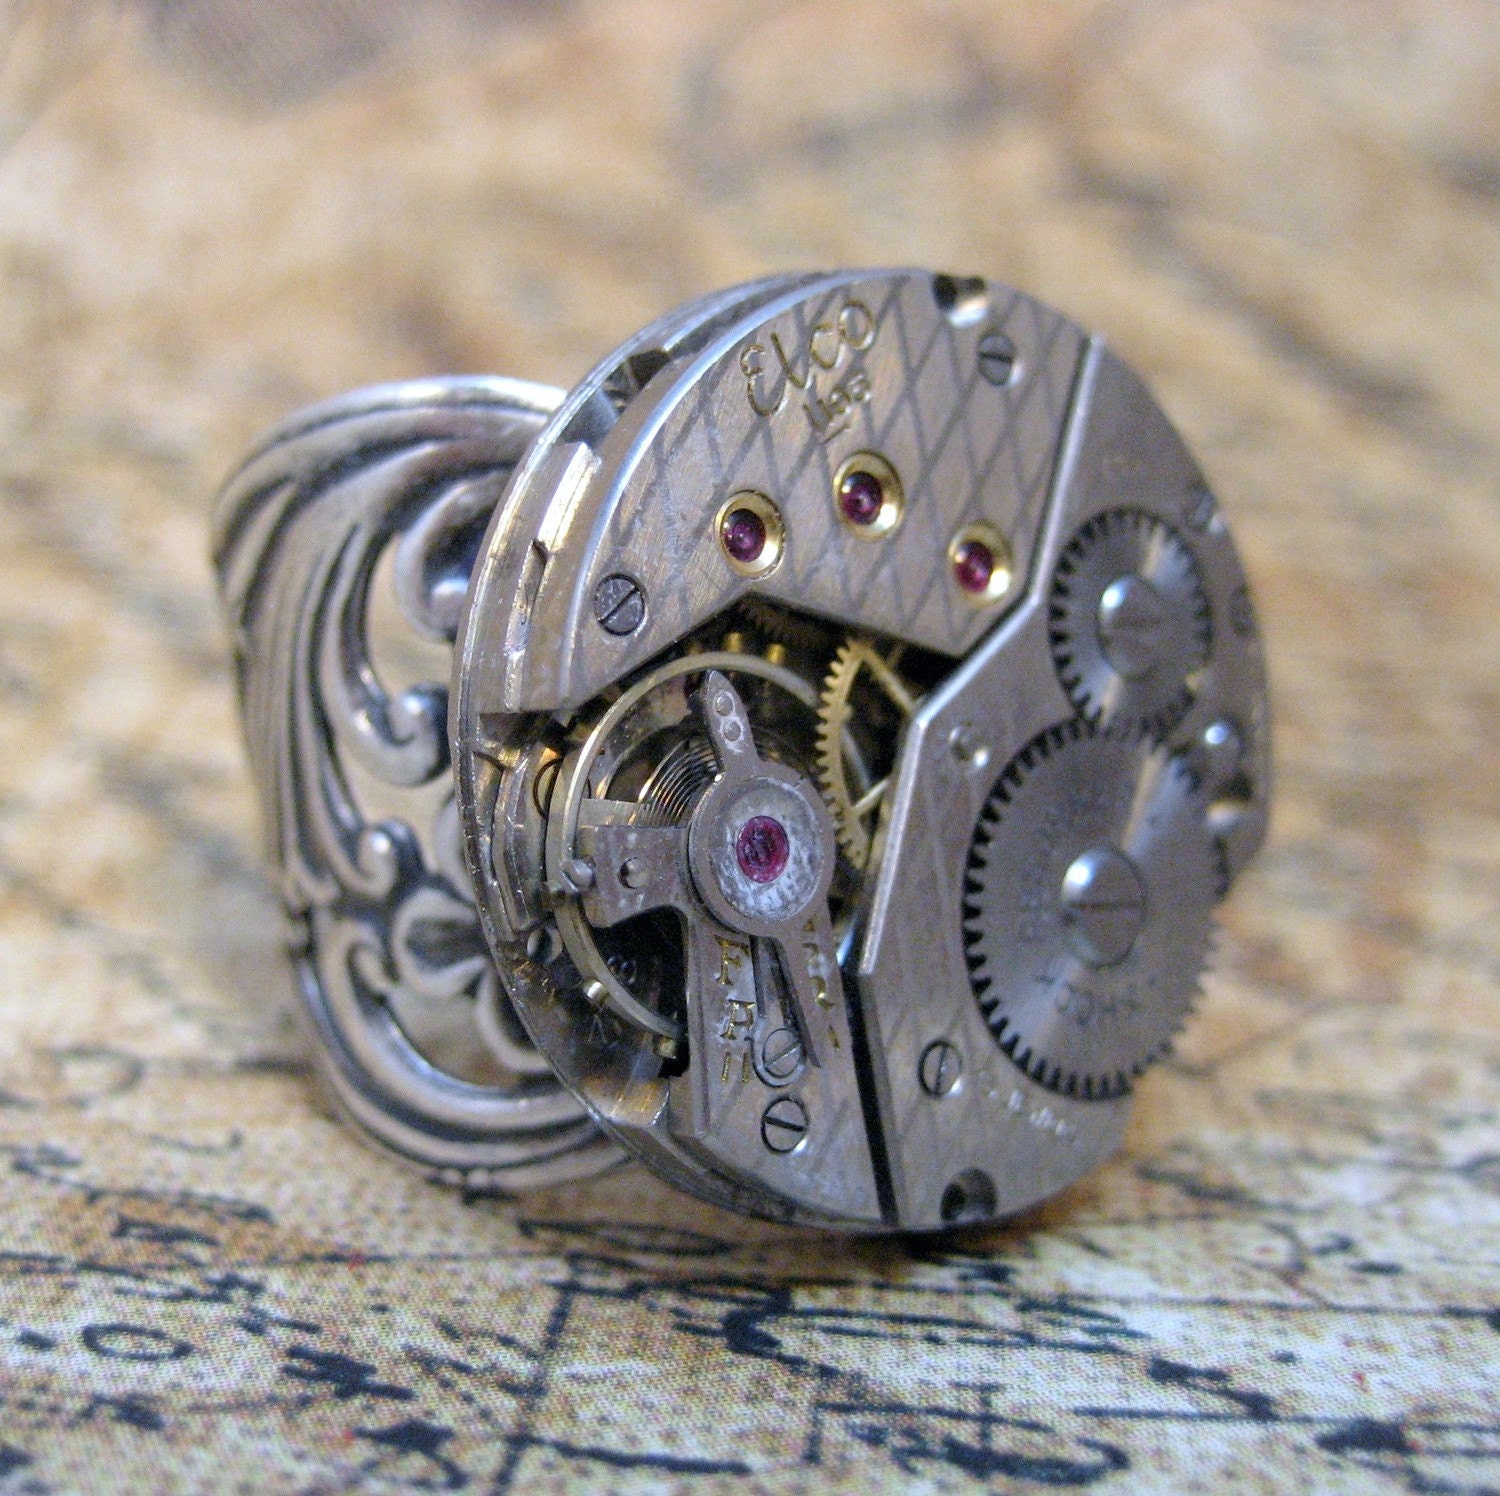 Argyle Steampunk Ring - Neo Victorian Antiqued Silver Tone Filigree - Vintage Repurposed Watch Movement - Hand Made and Designed by A Second Time